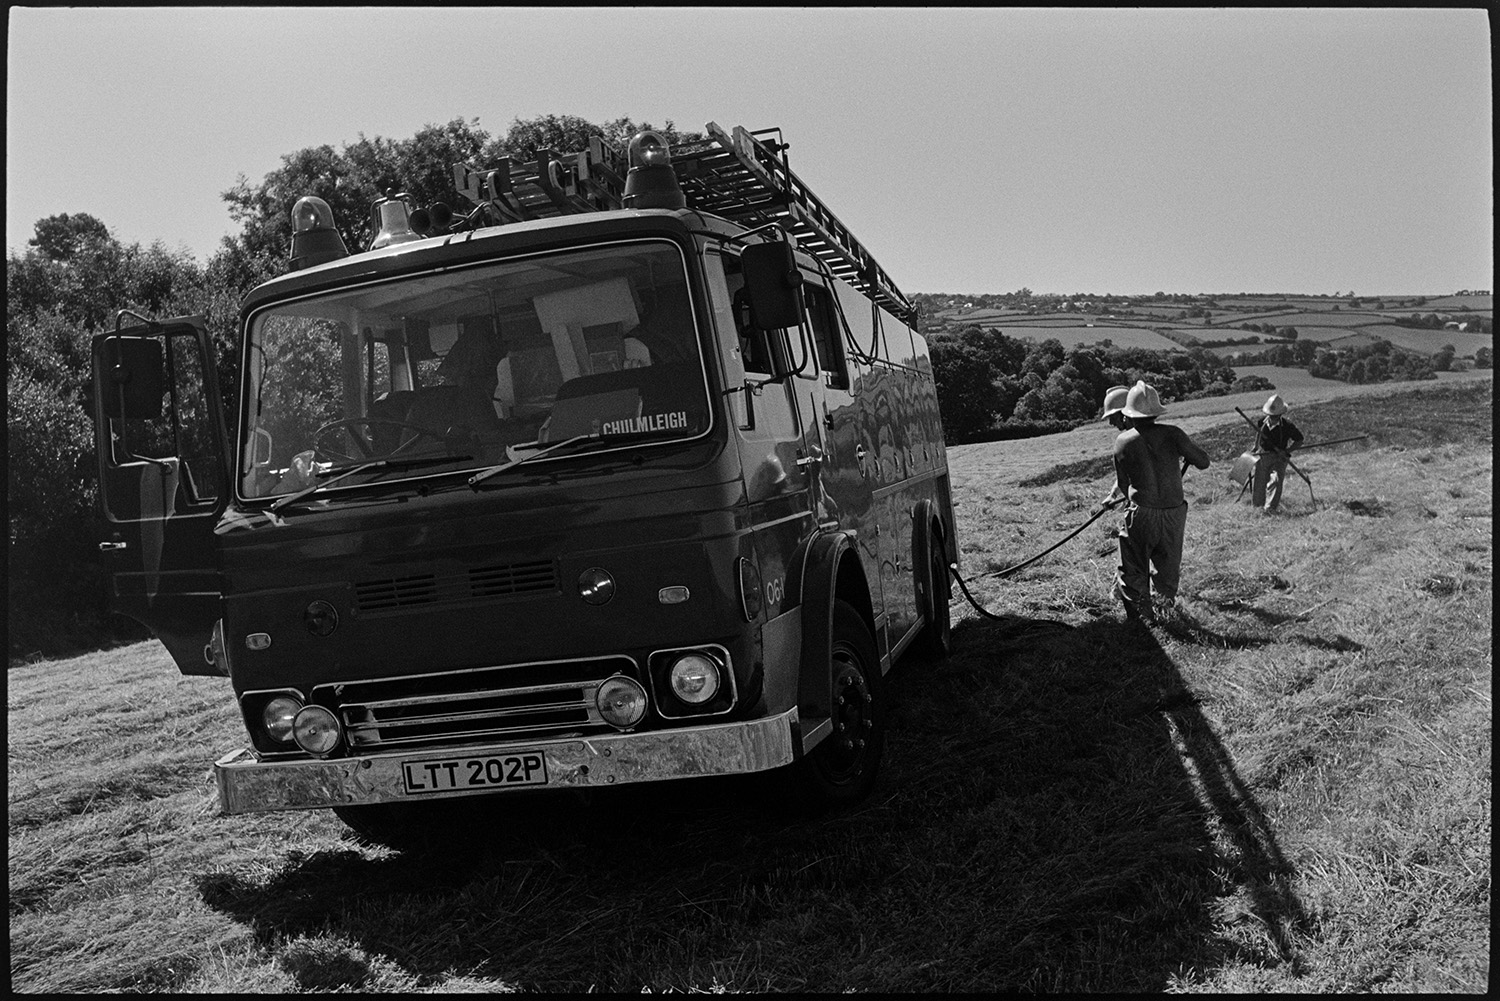 Firemen damping down field after crop fire. Fire engine parked in field.
[Firemen damping down smouldering embers after hosing down a crop fire in a field near Chawleigh. A fire engine is parked in the field.]